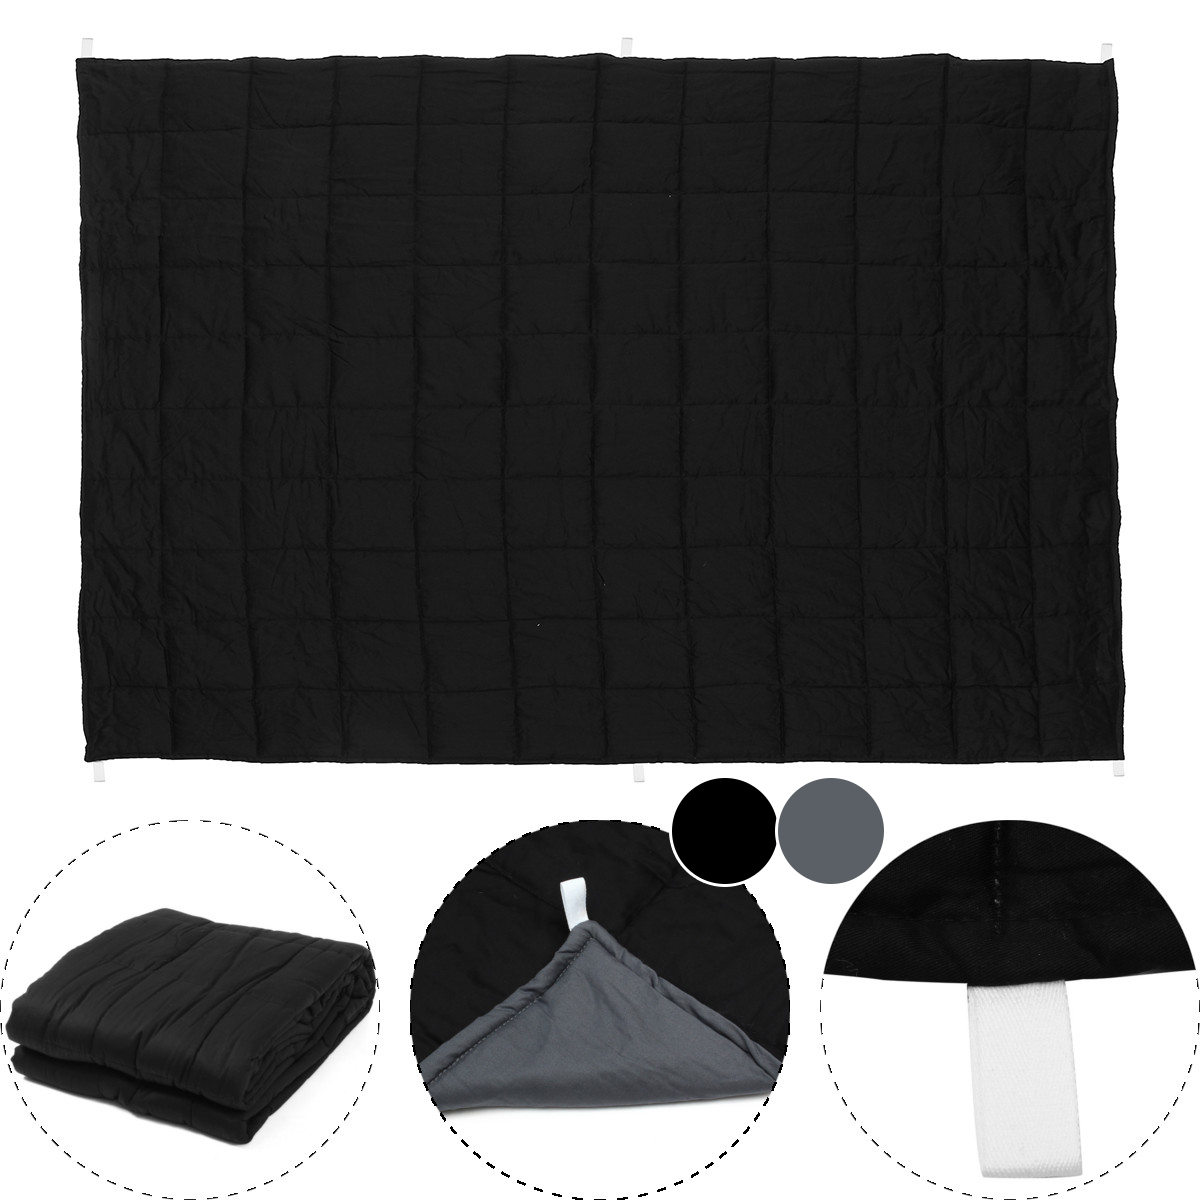 120x180CM-Black-Grey-Weighted-Blanket-Cotton-79115kg-Heavy-Sensory-Relax-Blankets-1349466